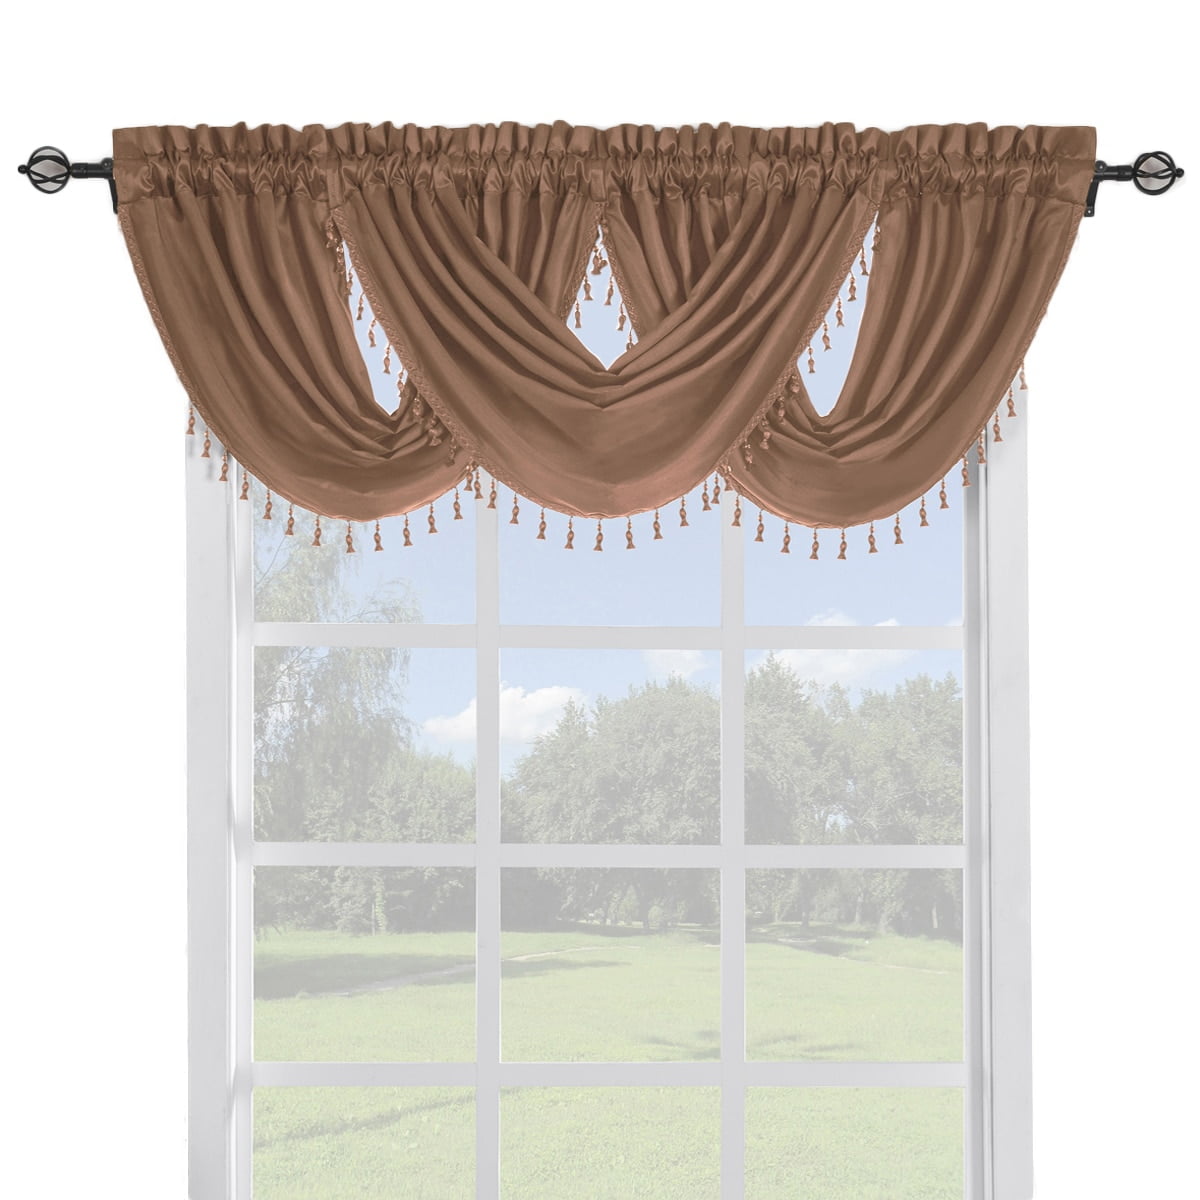 Soho 3 Pieces Faux Silk Scarf Window Treatment Includes 2 Panels and 1 Scarf 